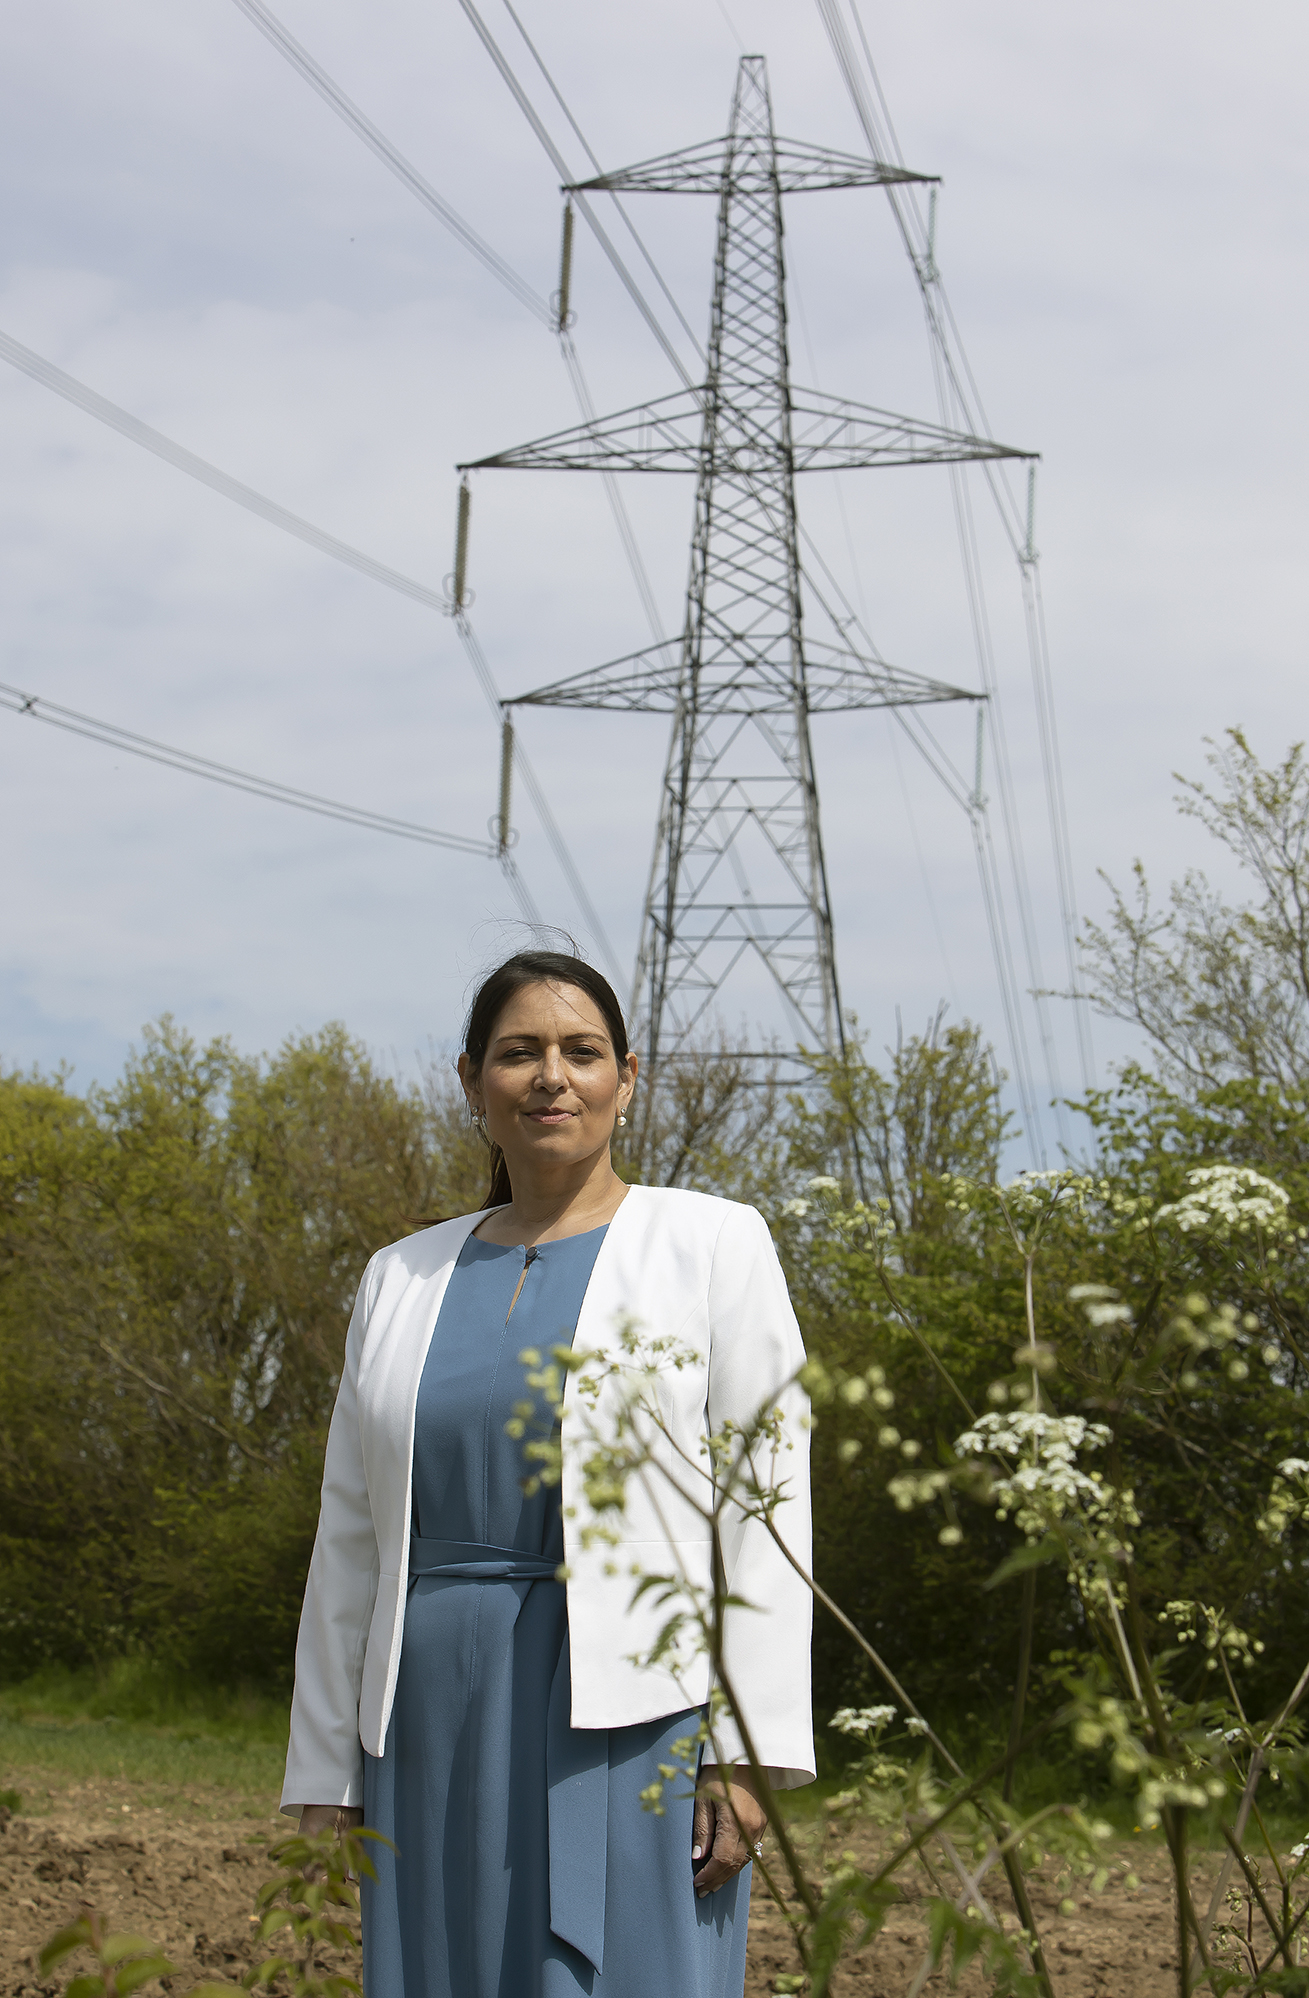 Priti says: Opportunity for sustainable offshore energy grid shouldn't be missed